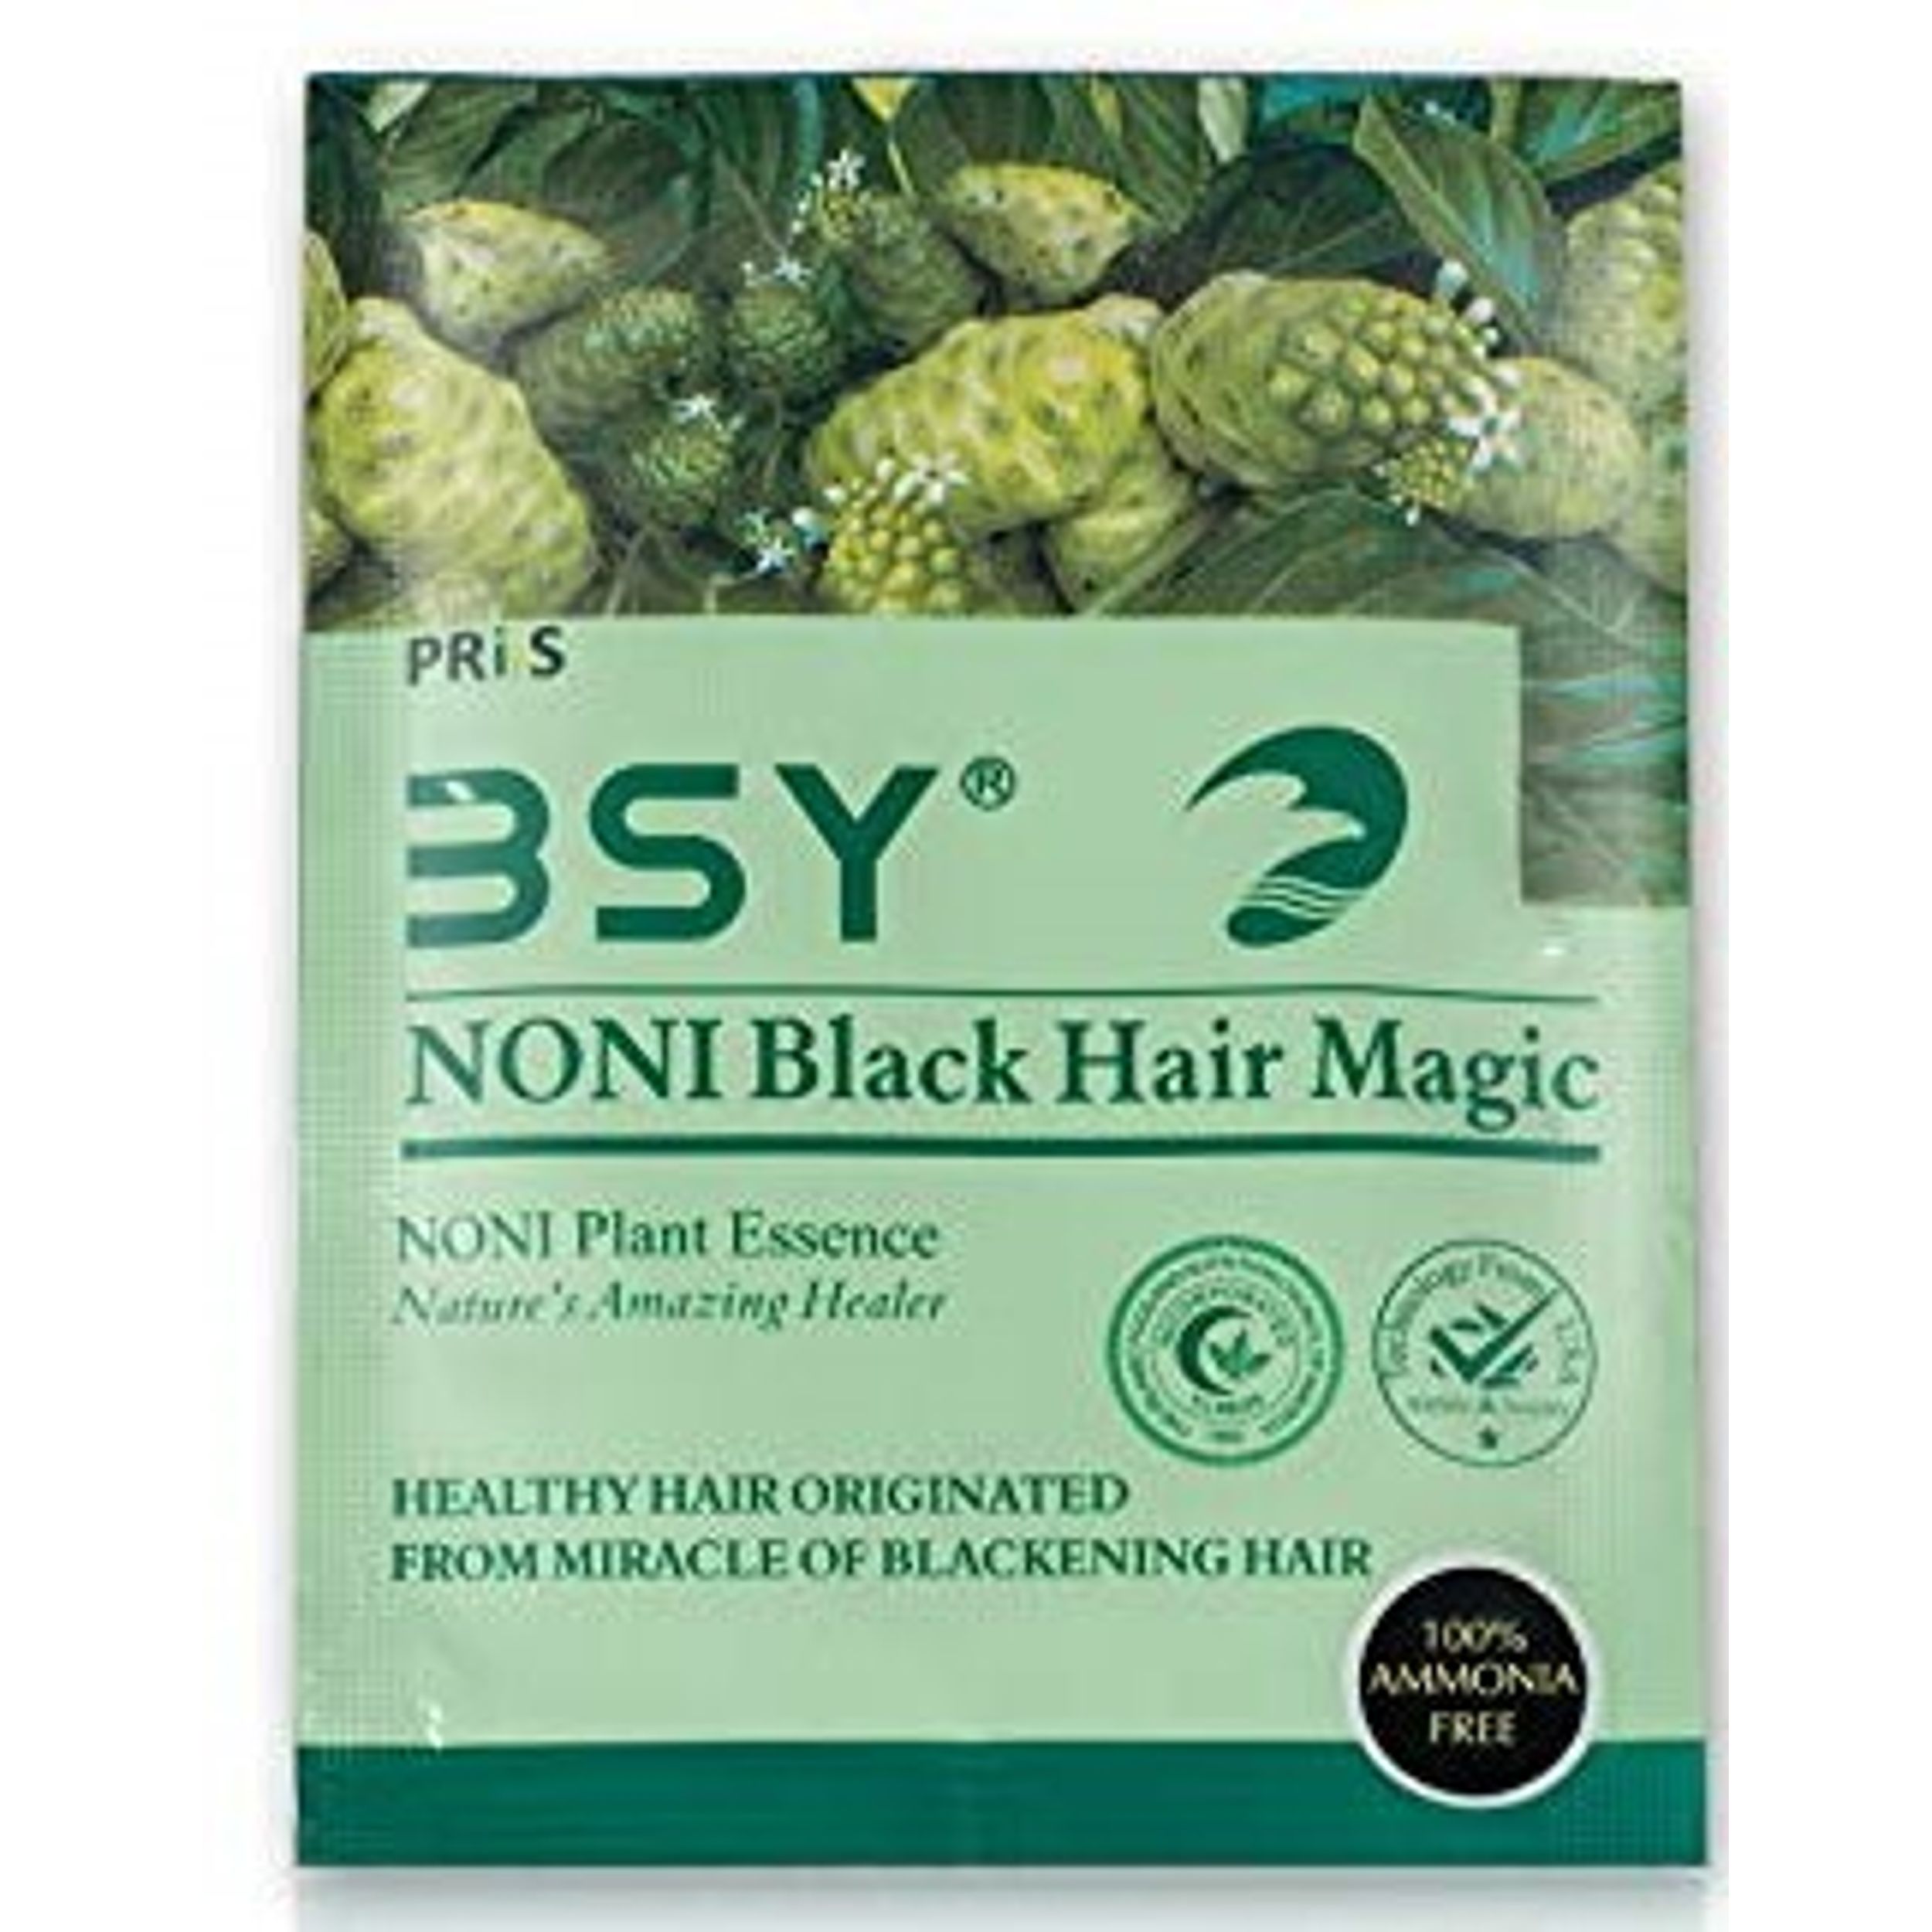 How to use noni hair color shampoo🌿 Discover the secret to vibrant hair  with Noni Hair Color Shampoo! Transform your natural black hair… | Instagram